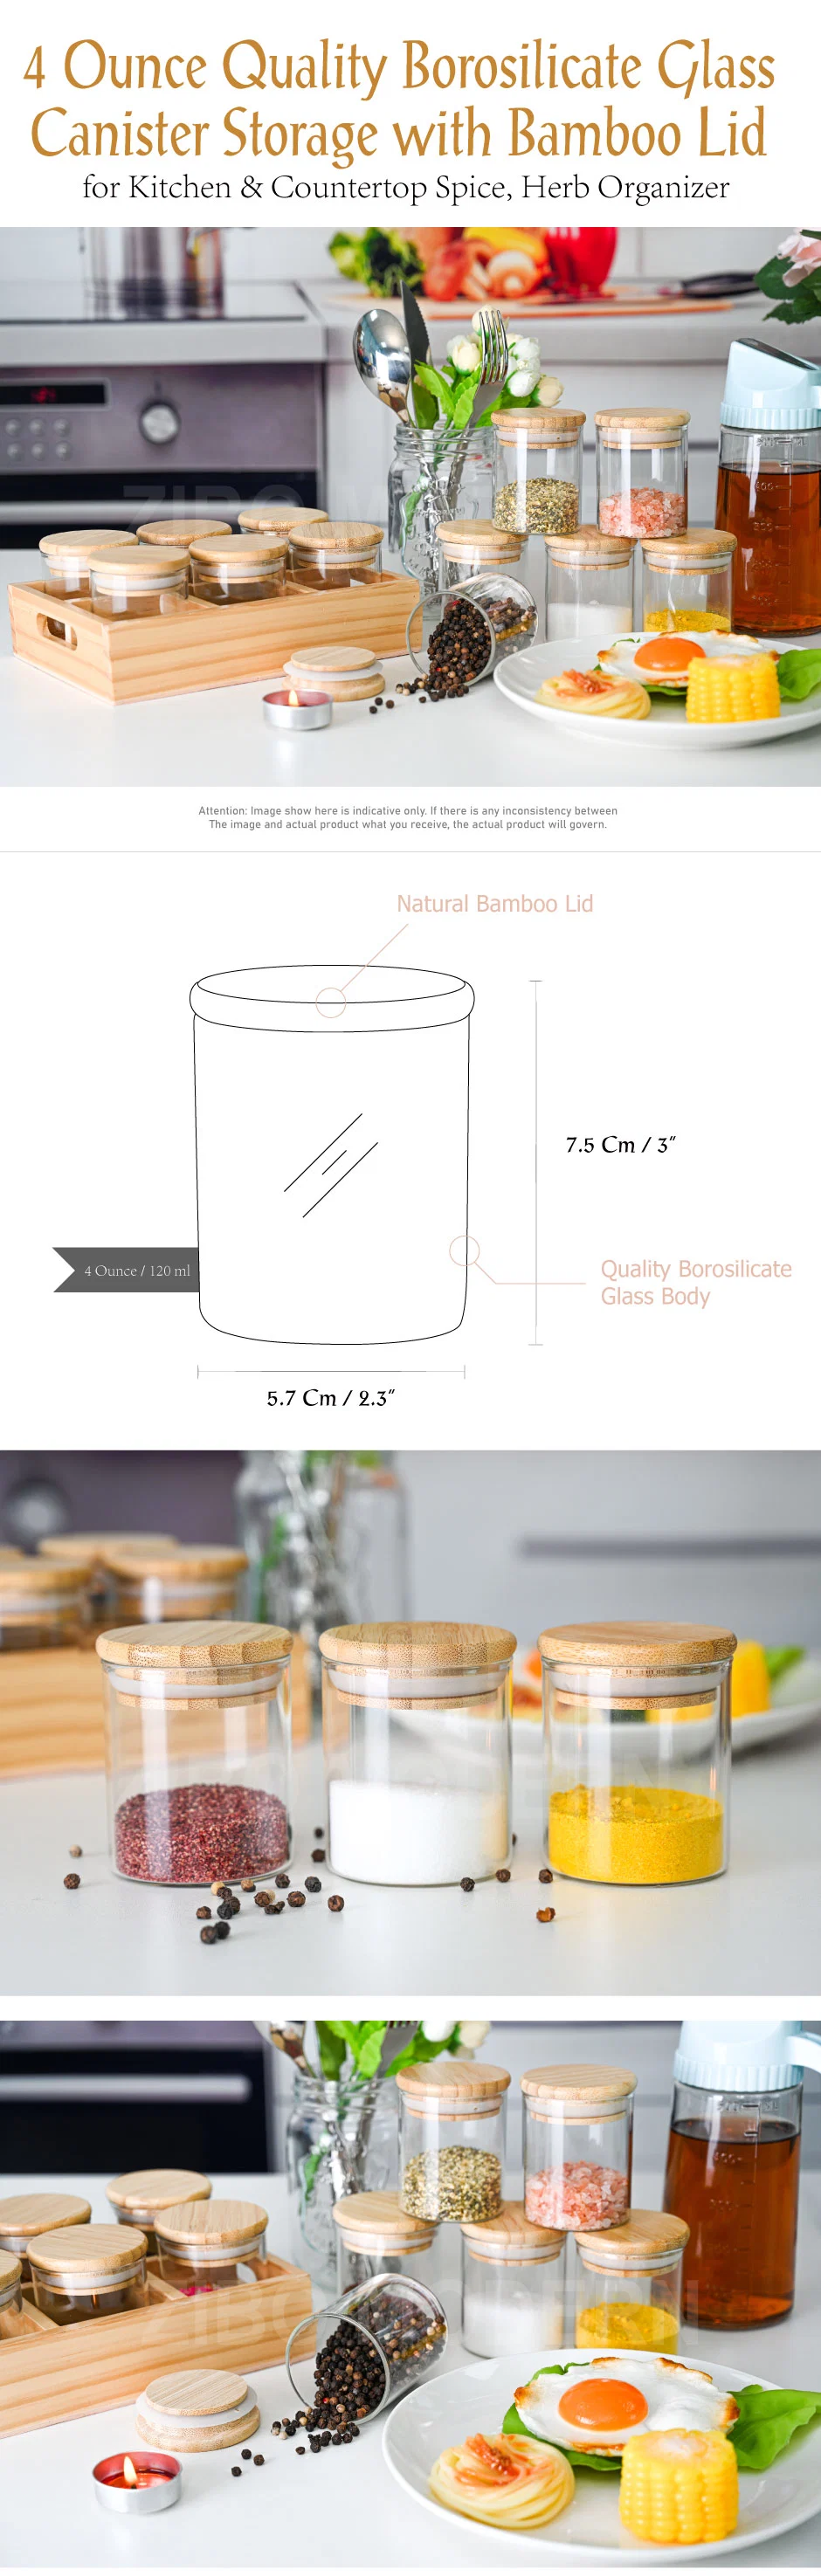 4 Ounce Quality Borosilicate Glass Canister Storage with Bamboo Lid, for Kitchen &amp; Countertop Spice, Herb Organizer